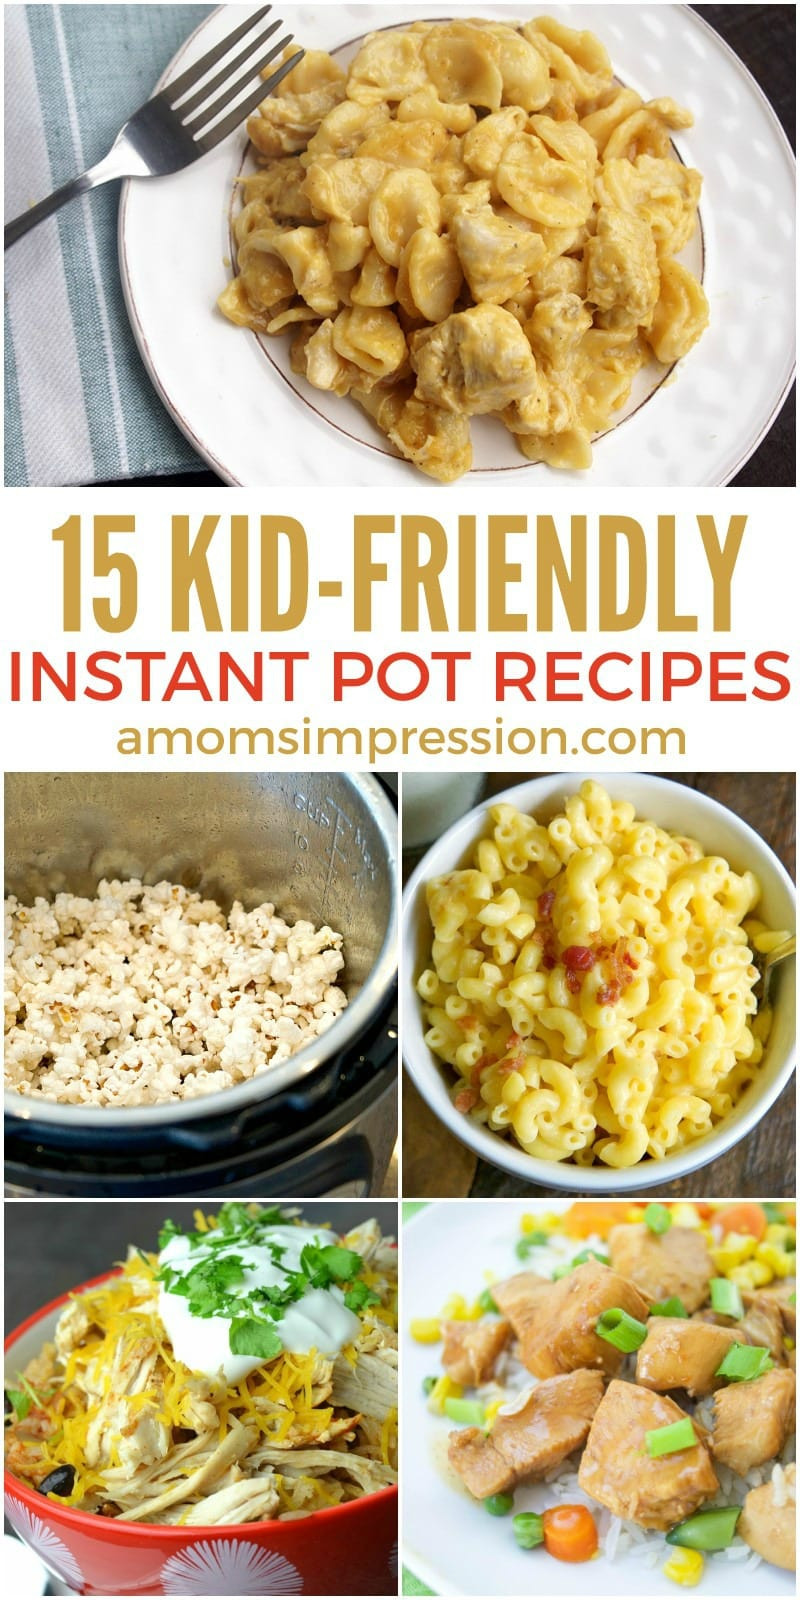 Easy Kid Friendly Dinners
 15 Quick and Easy Kid Friendly Instant Pot Recipes